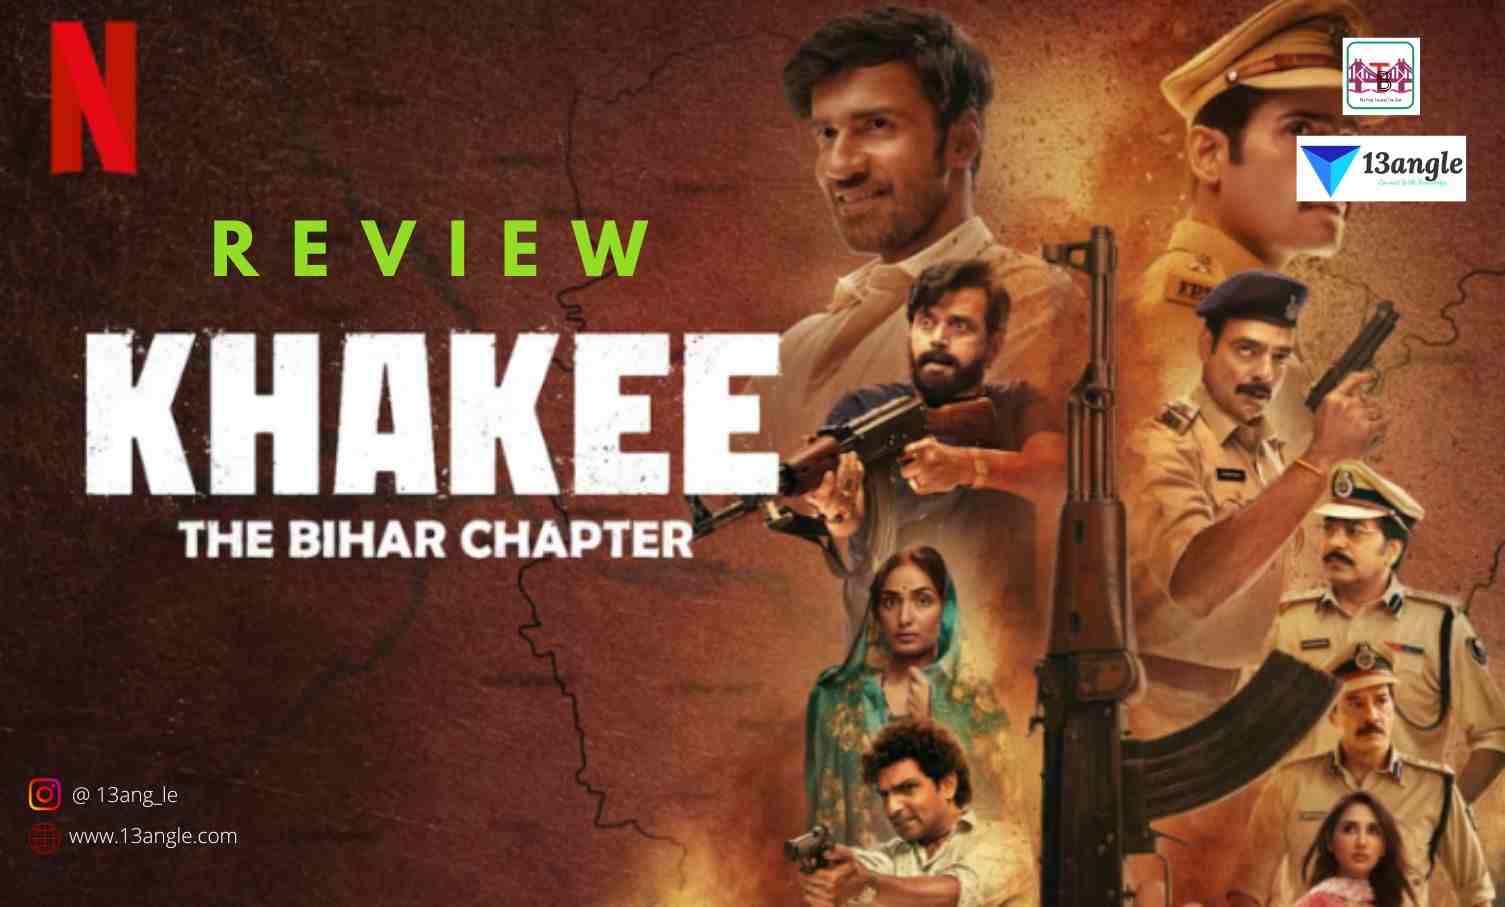 Movie review of Khakee-The Bihar Chapter- The Bridge (13angle)